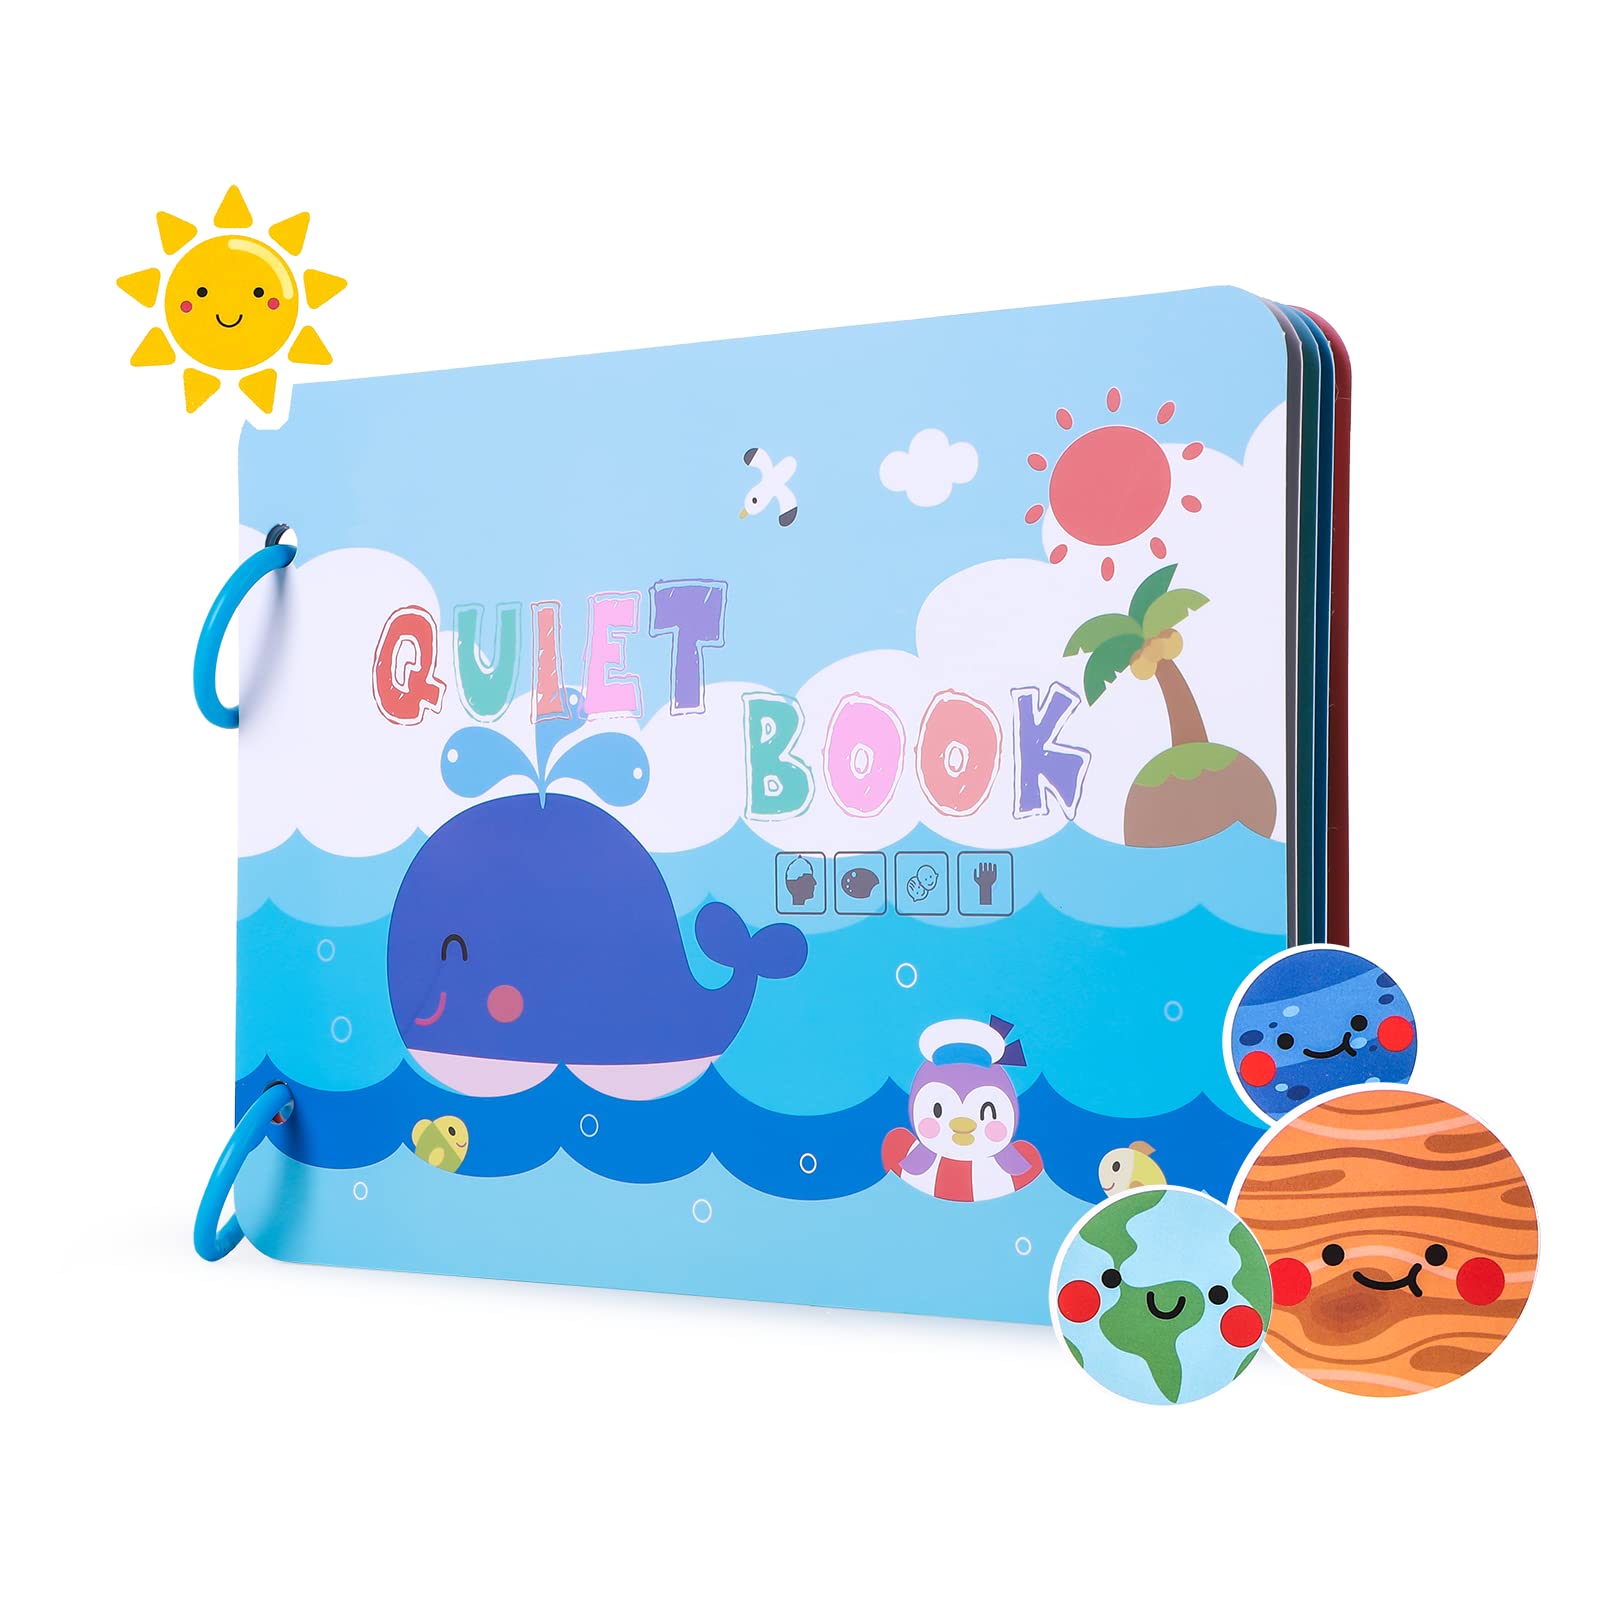 Quiet Book for Toddlers Preschool Learning Toys